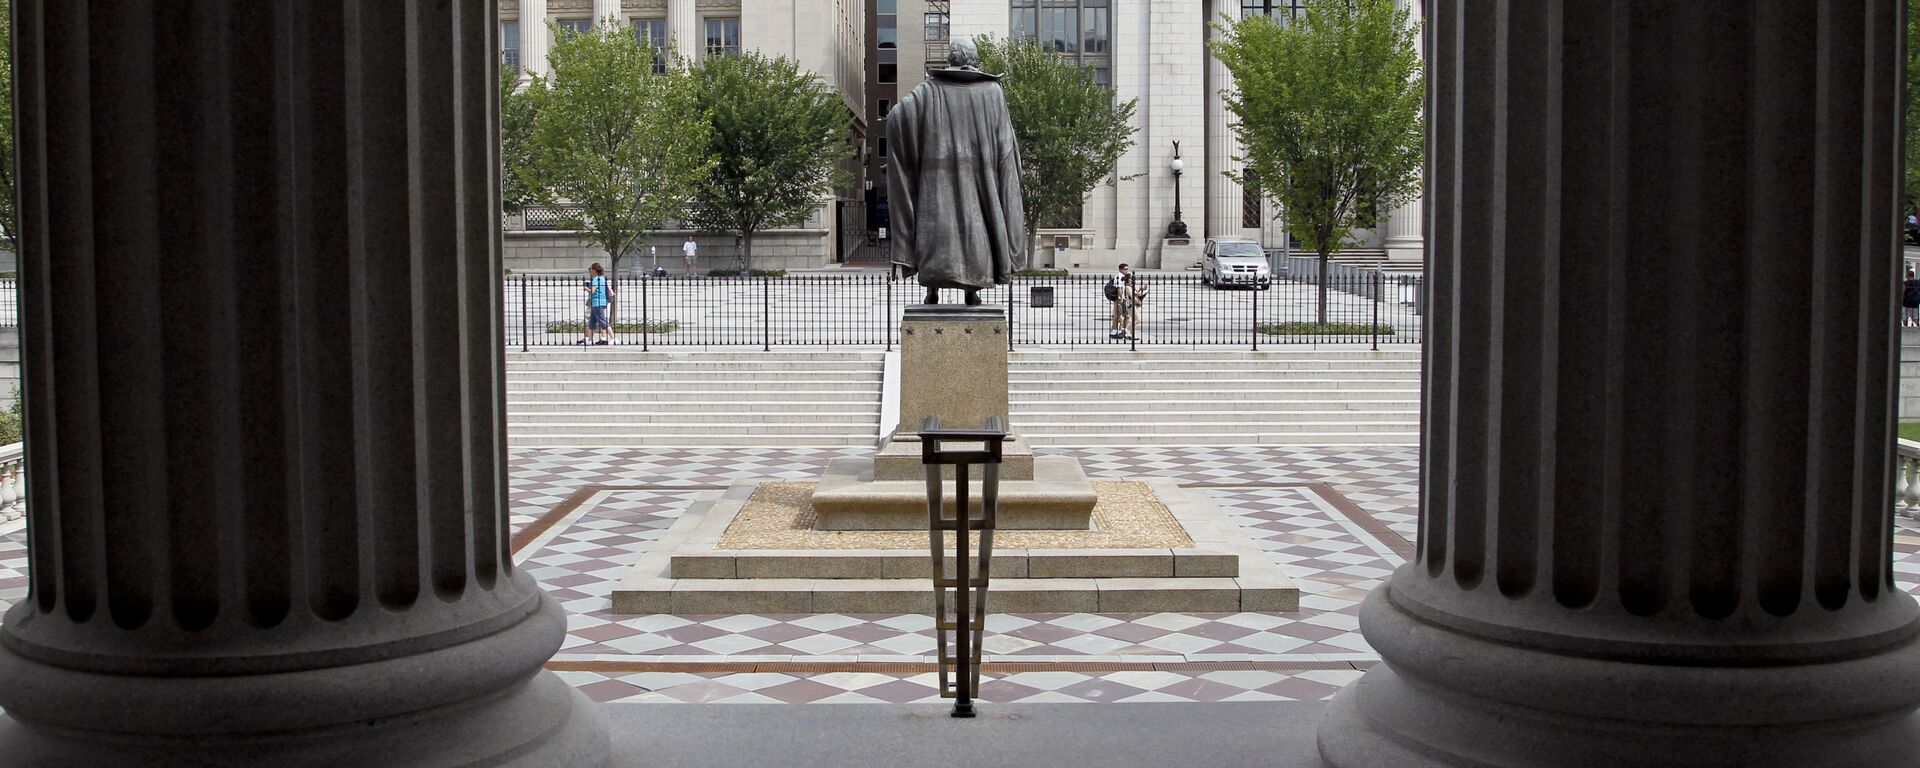 In this Aug. 17, 2010 file photo, a statue of the Albert Gallatin, the 4th Secretary of the Treasury, stands on the north patio of the US Treasury Building in Washington - Sputnik International, 1920, 04.03.2021